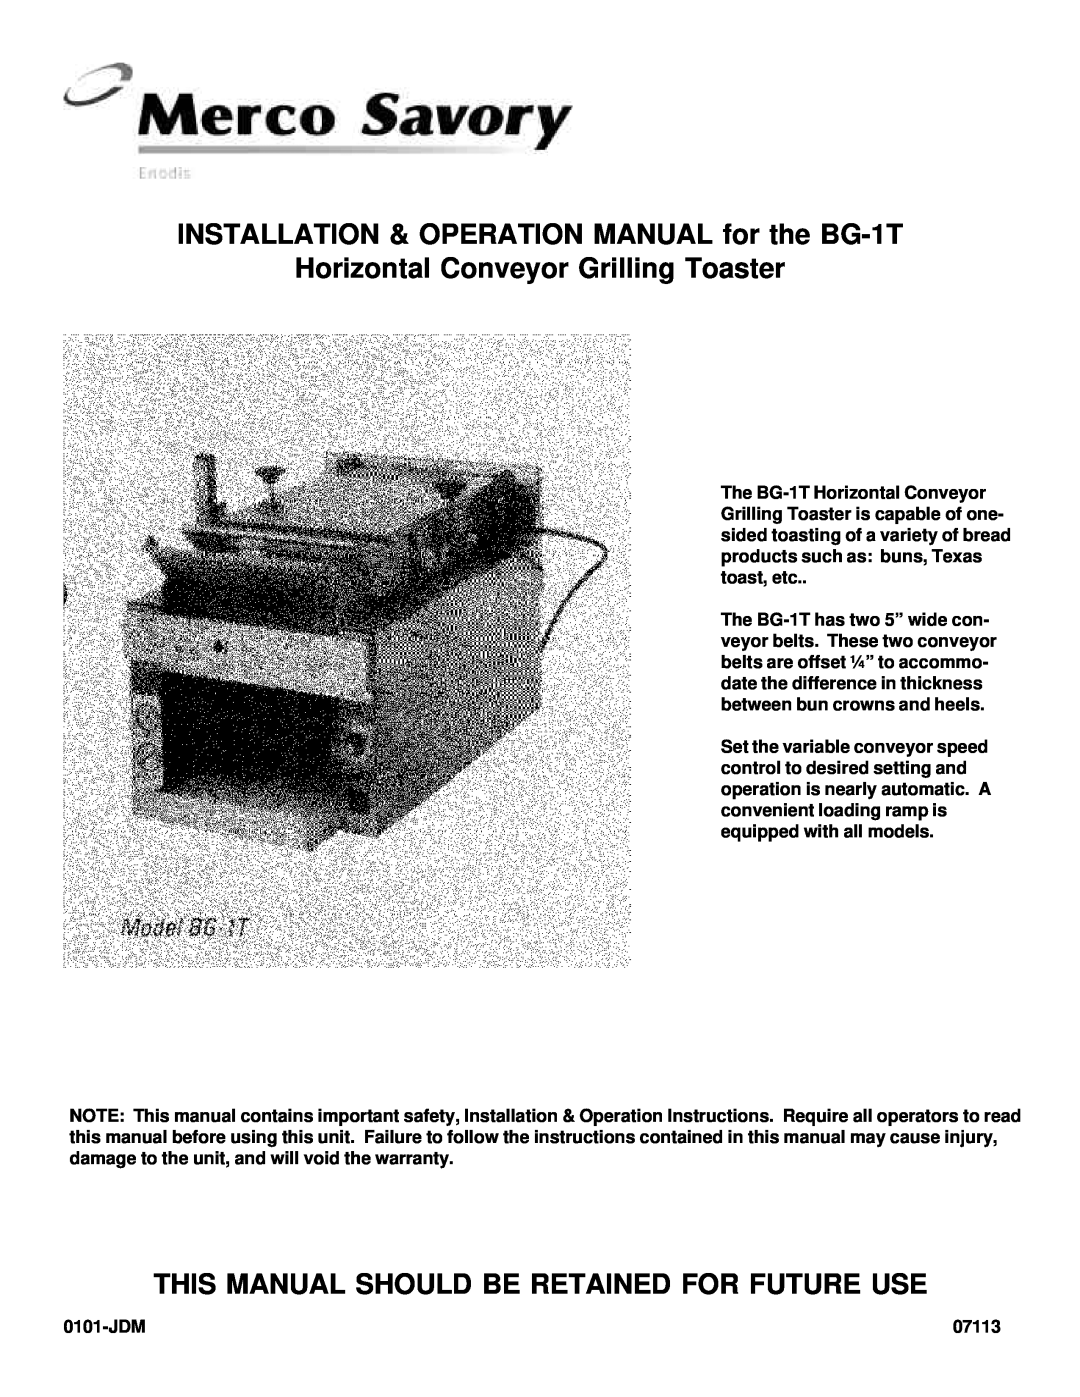 Merco Savory BG-1T operation manual Horizontal Conveyor Grilling Toaster, This Manual Should Be Retained For Future Use 